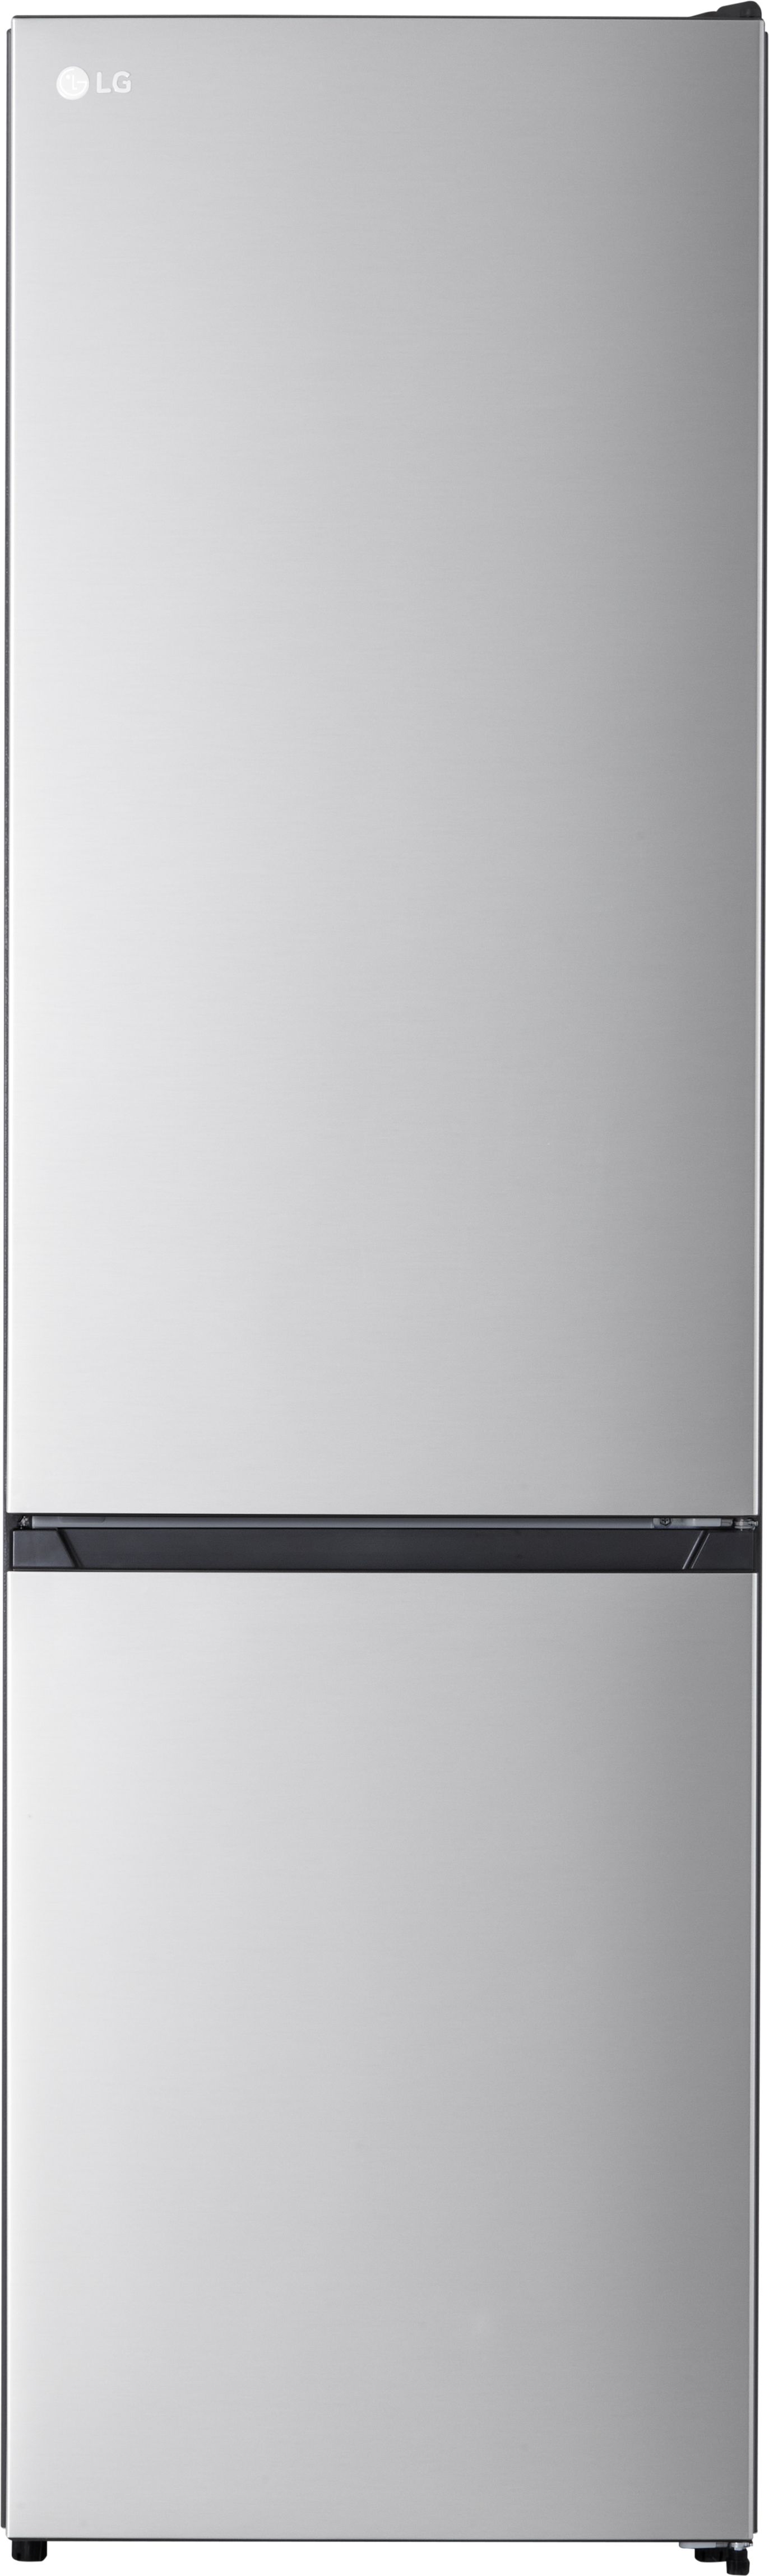 LG GBM22HSADH 70/30 No Frost Fridge Freezer - Silver - D Rated, Silver